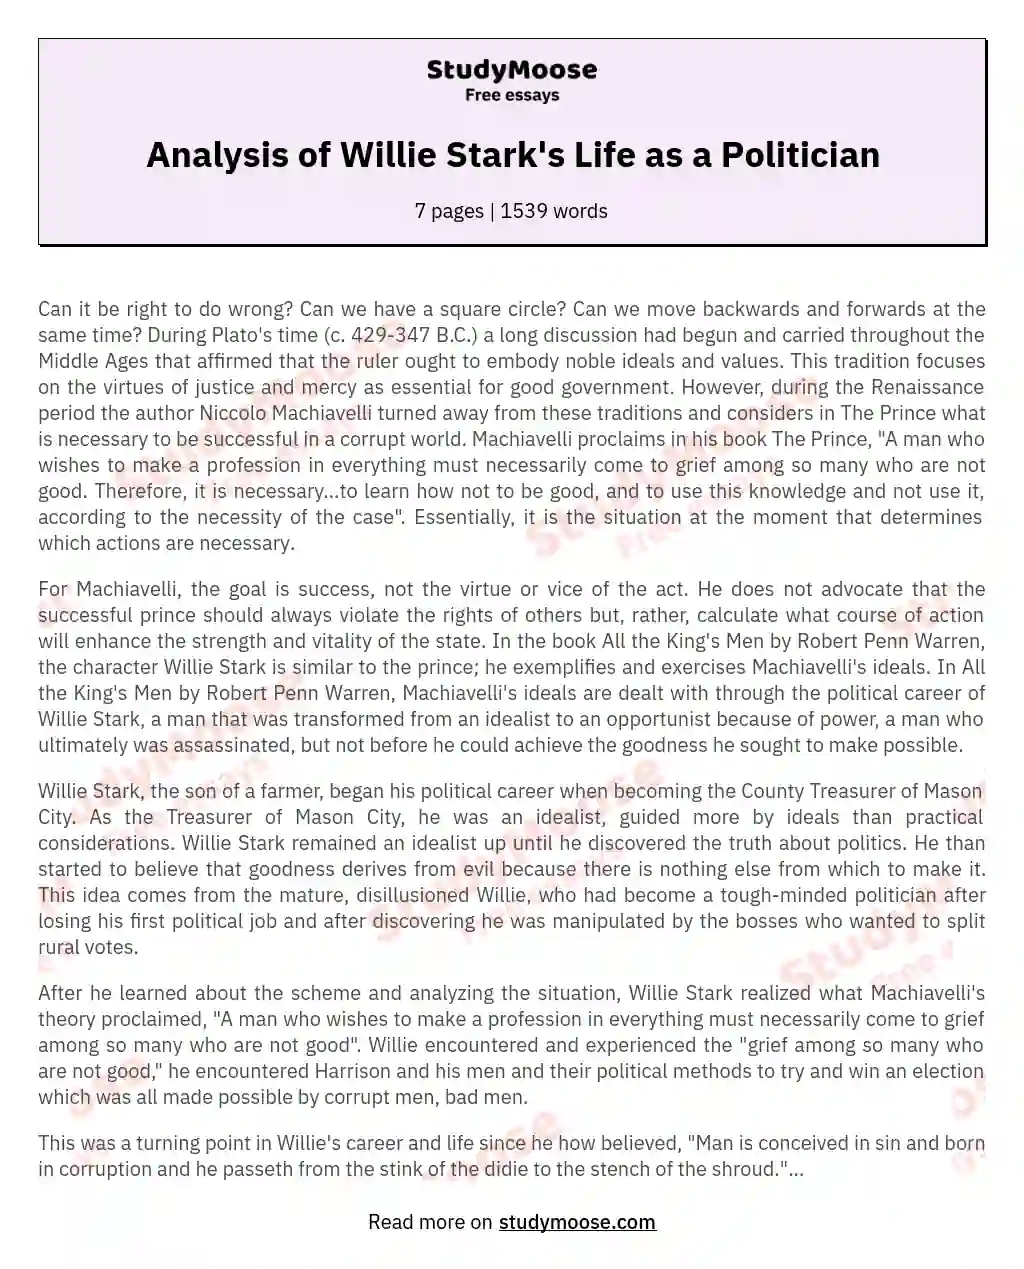 Analysis of Willie Stark's Life as a Politician